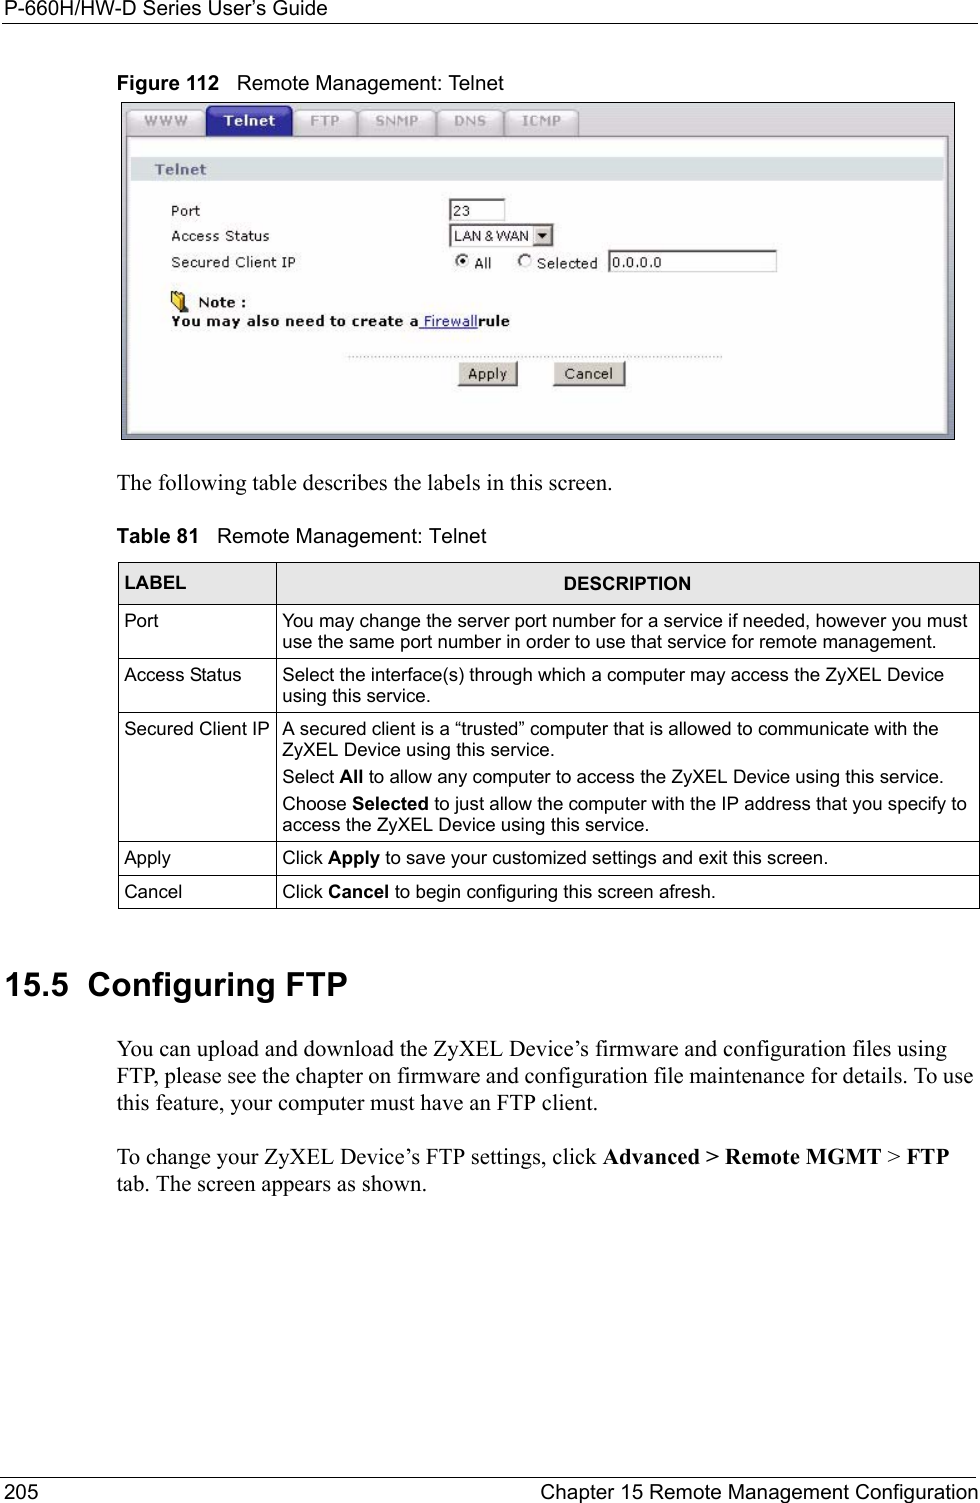 P-660H/HW-D Series User’s Guide205 Chapter 15 Remote Management ConfigurationFigure 112   Remote Management: TelnetThe following table describes the labels in this screen.15.5  Configuring FTP You can upload and download the ZyXEL Device’s firmware and configuration files using FTP, please see the chapter on firmware and configuration file maintenance for details. To use this feature, your computer must have an FTP client.To change your ZyXEL Device’s FTP settings, click Advanced &gt; Remote MGMT &gt; FTP tab. The screen appears as shown.Table 81   Remote Management: TelnetLABEL DESCRIPTIONPort You may change the server port number for a service if needed, however you must use the same port number in order to use that service for remote management.Access Status Select the interface(s) through which a computer may access the ZyXEL Device using this service.Secured Client IP A secured client is a “trusted” computer that is allowed to communicate with the ZyXEL Device using this service. Select All to allow any computer to access the ZyXEL Device using this service.Choose Selected to just allow the computer with the IP address that you specify to access the ZyXEL Device using this service.Apply Click Apply to save your customized settings and exit this screen. Cancel Click Cancel to begin configuring this screen afresh.